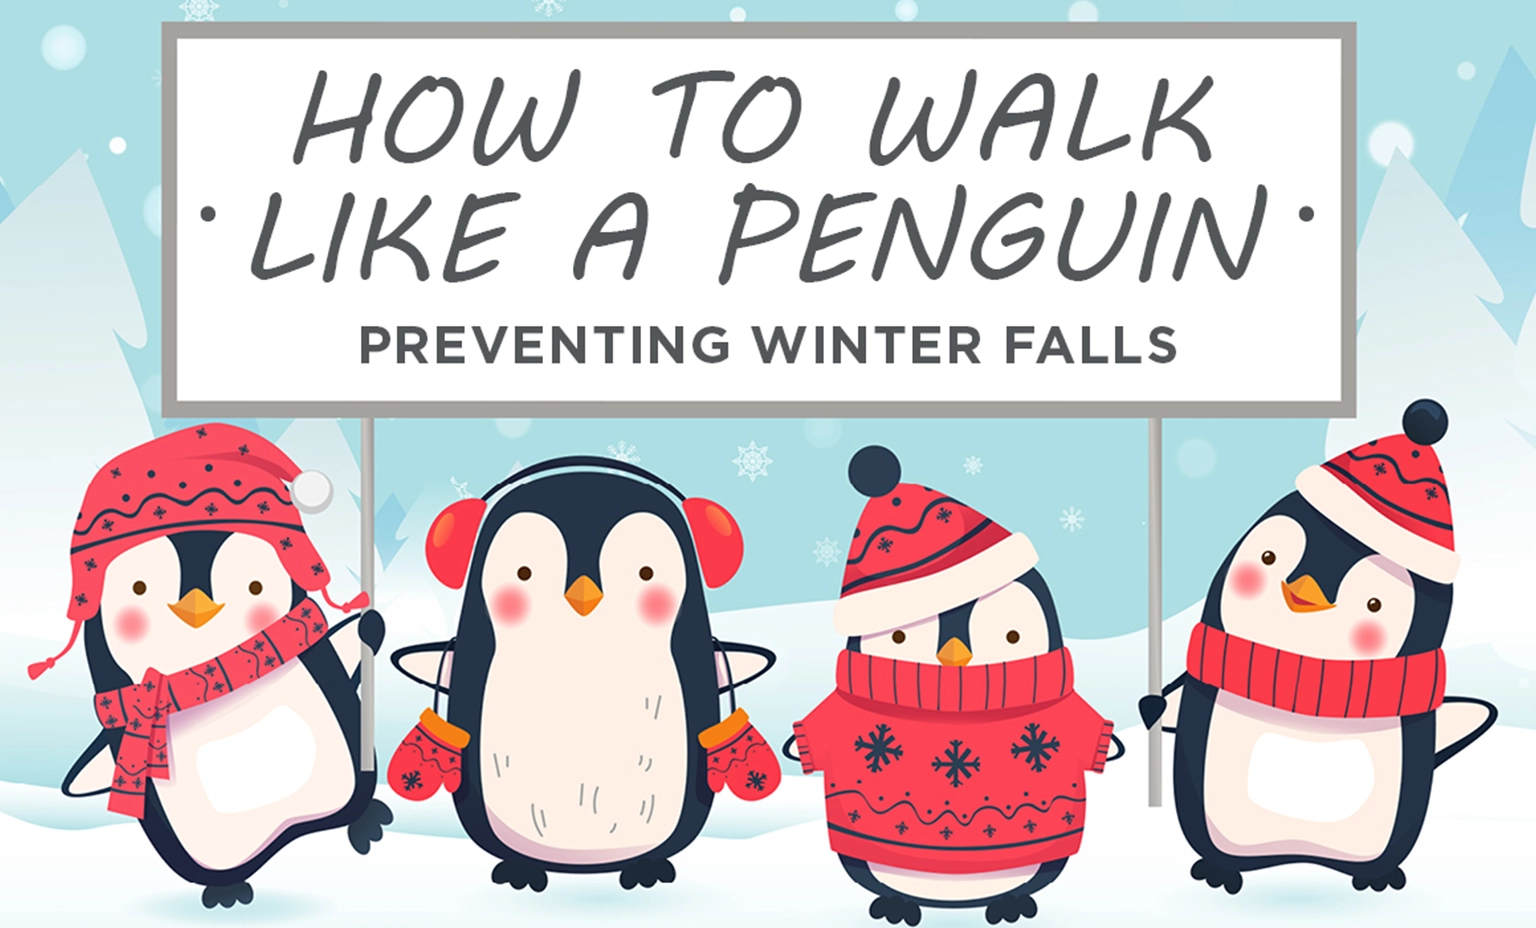 Mount Nittany Health Encourages Everyone to ‘Walk like a Penguin’ this Winter